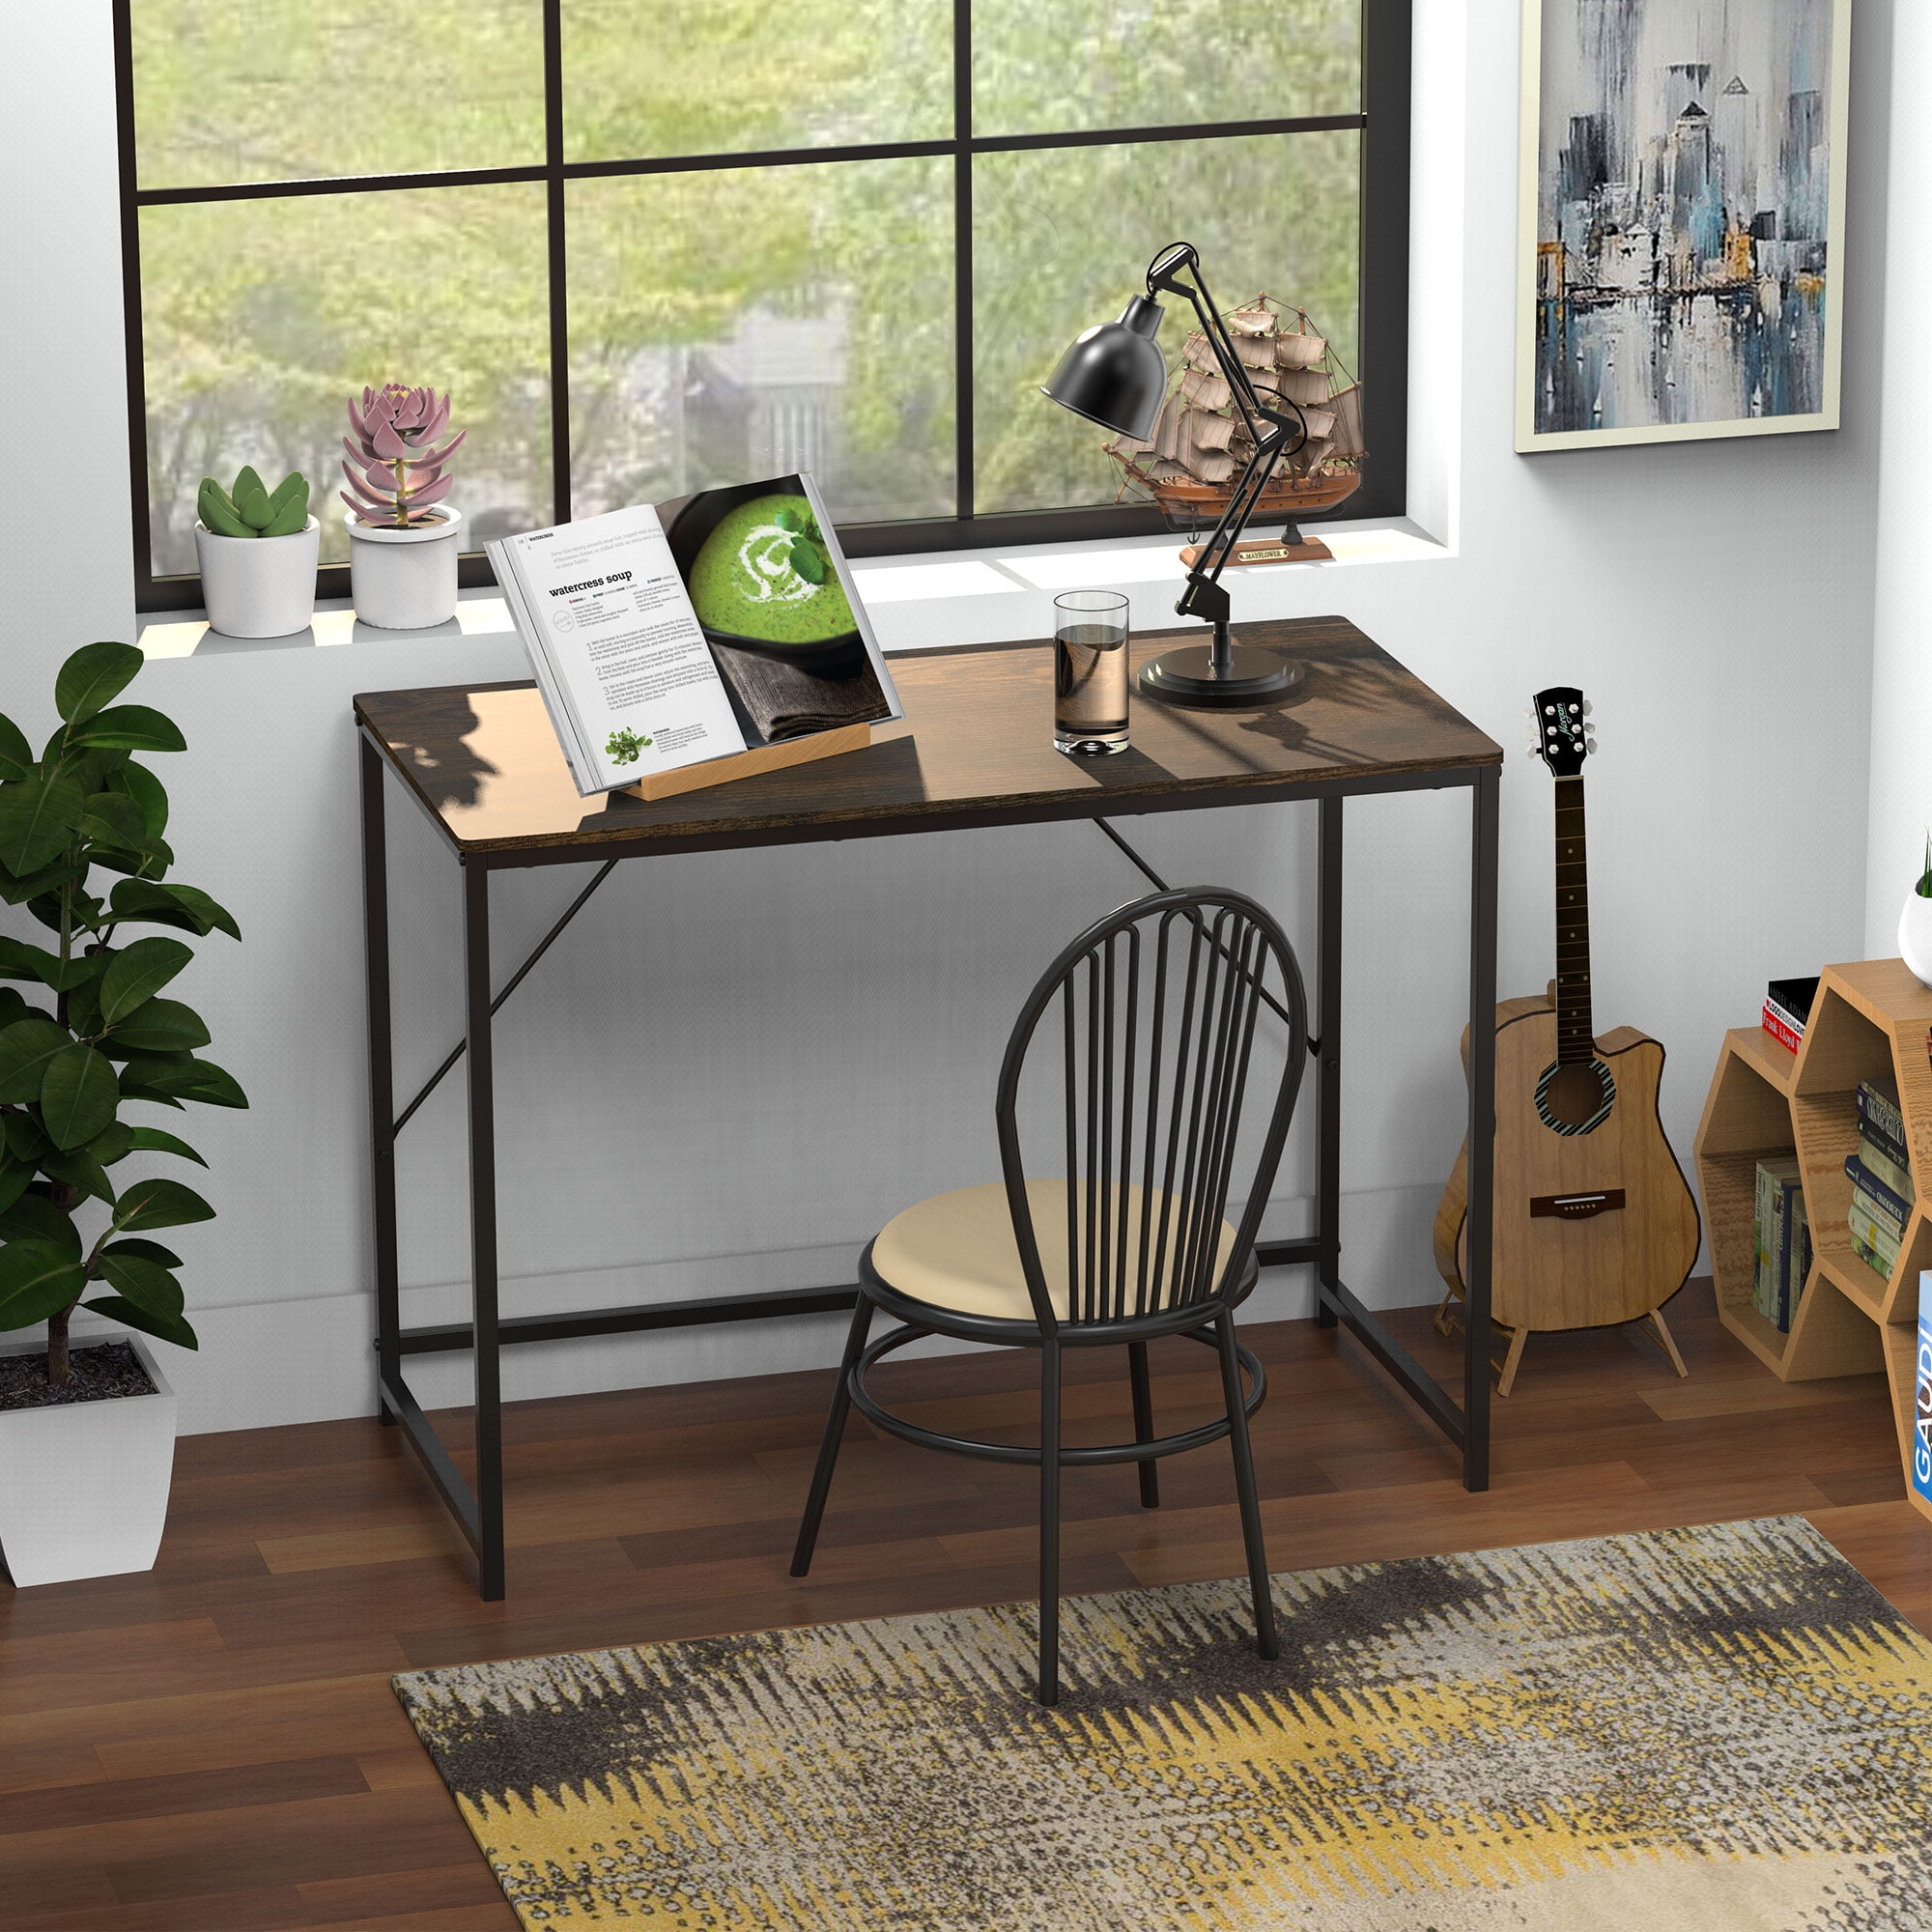 Computer Desks,PC Laptop Desk Corner Desktop Desk End Table Compact Gaming Table Writing Study Table Workstation with 1 Door and 1 Drawer for Small Space Home Living Room Office Bedroom Black 